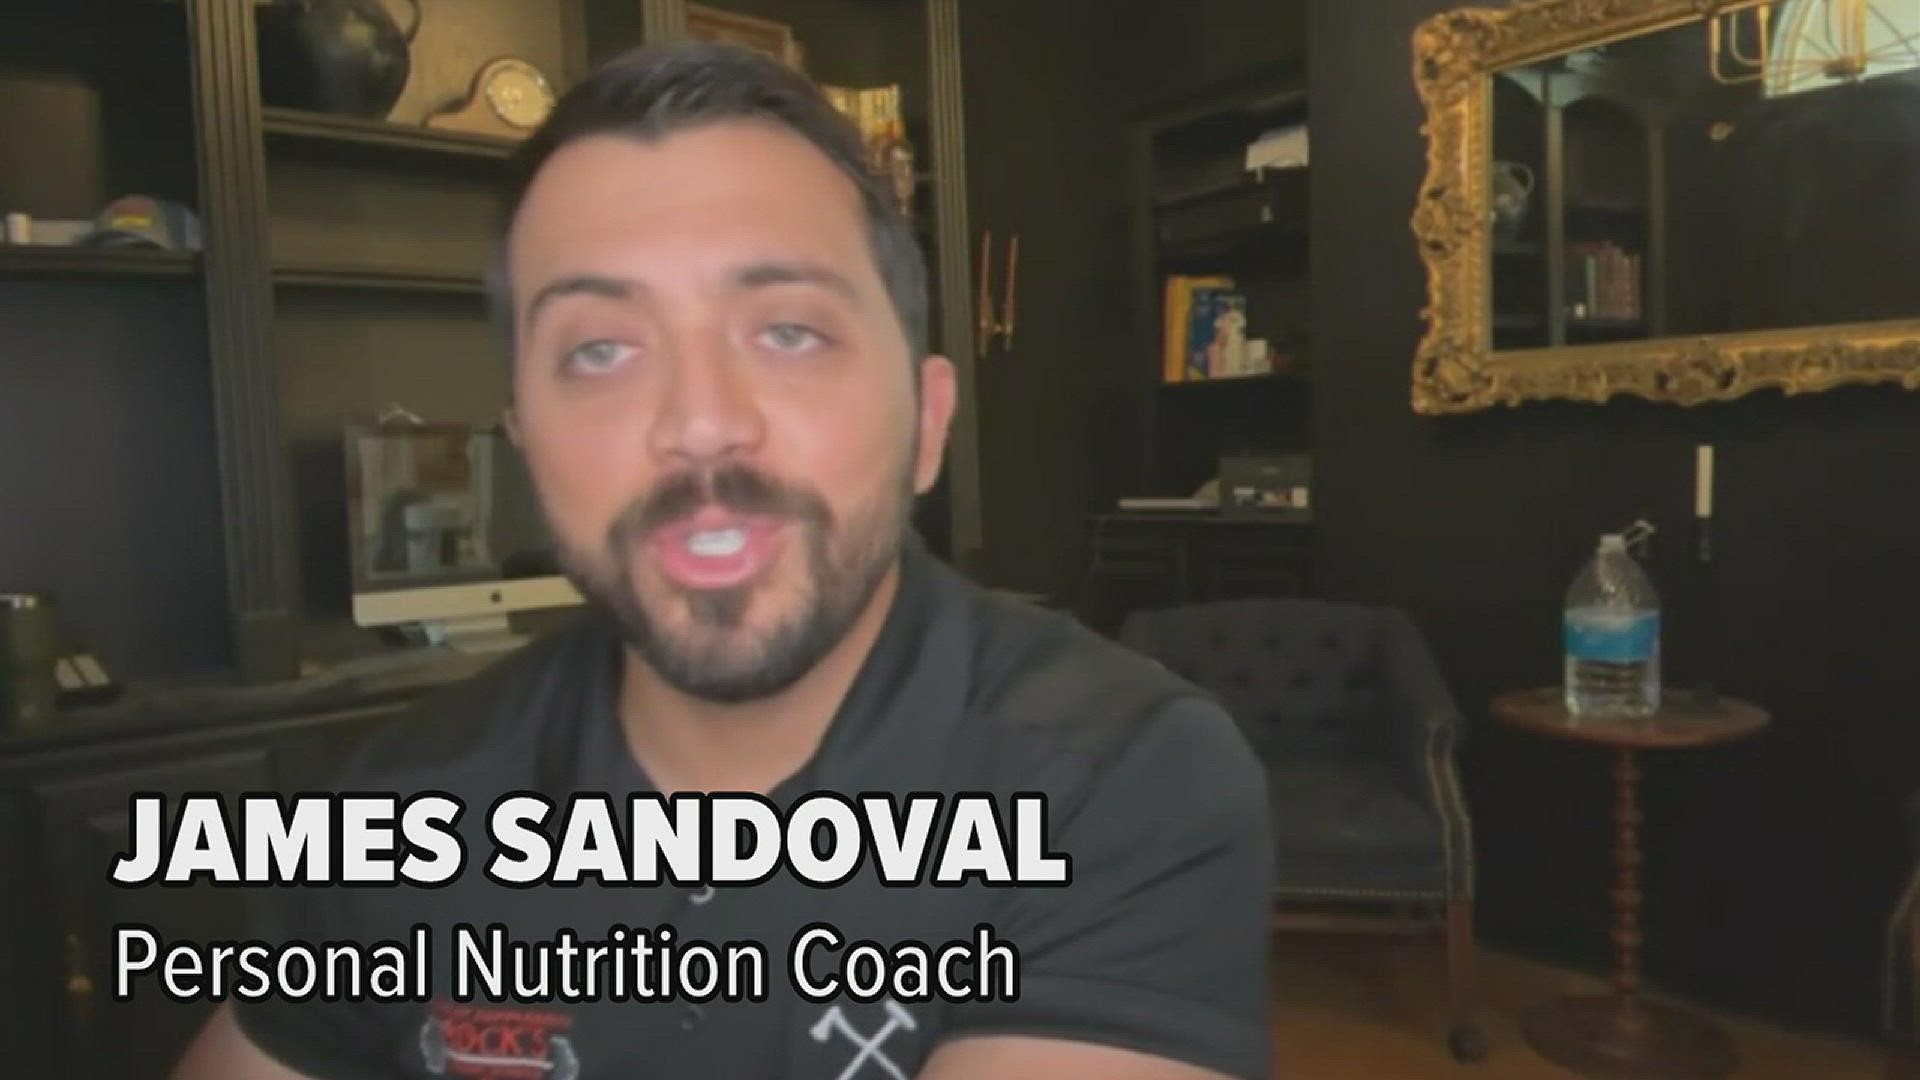 In this Domingo Live Digital Exclusive, Personal Nutrition Coach James Sandoval breaks down three reasons why our bodies store excess fat.